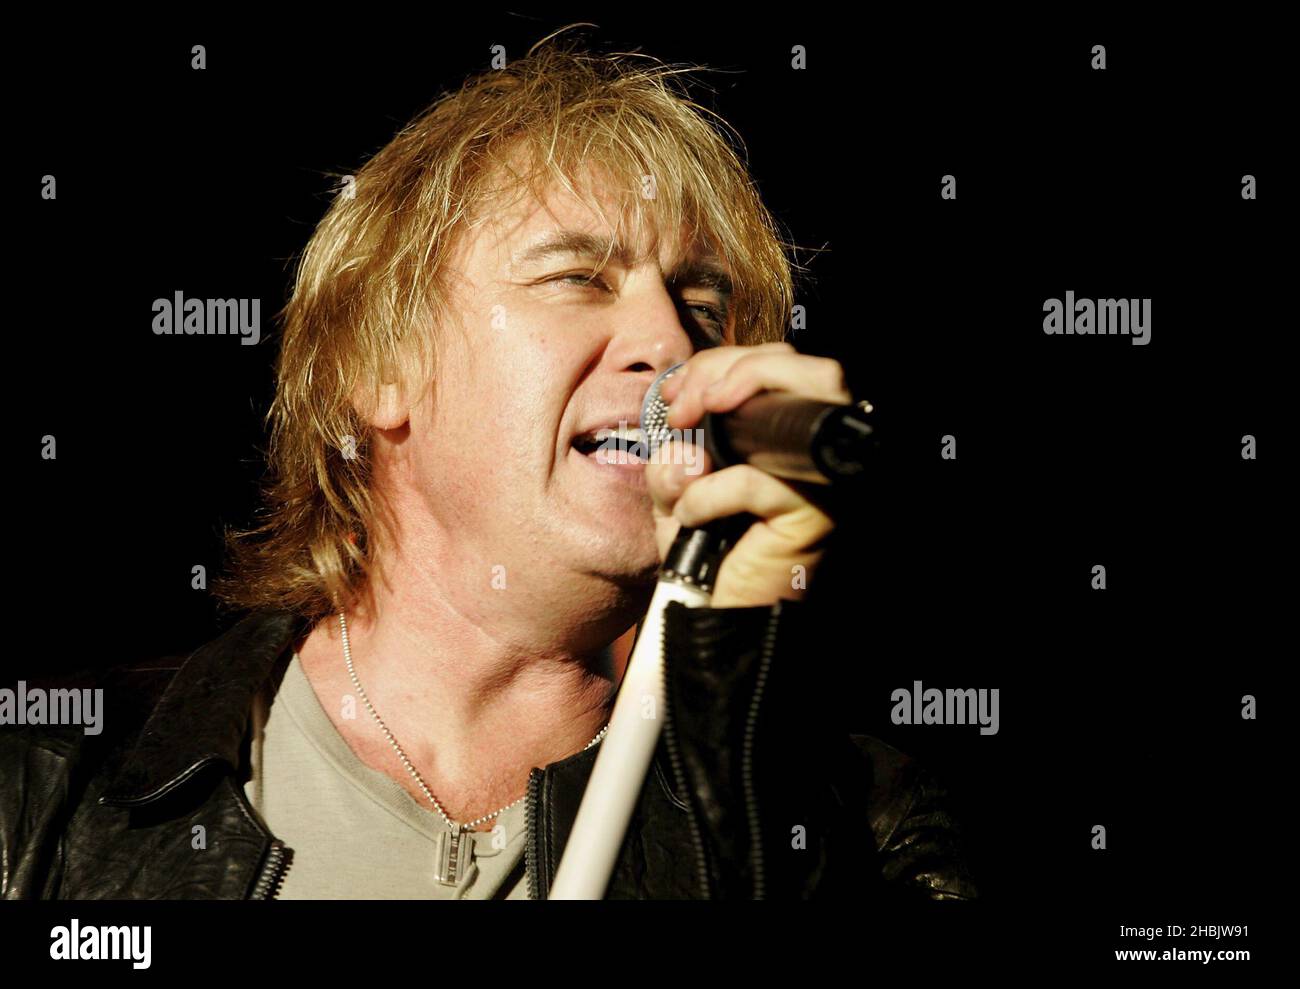 Vivian Camphell, Joe Elliott, Rick Allen, Phil Collen of Def Leppard performs on stage at live show promoting their new album 'Yeah'. Stock Photo